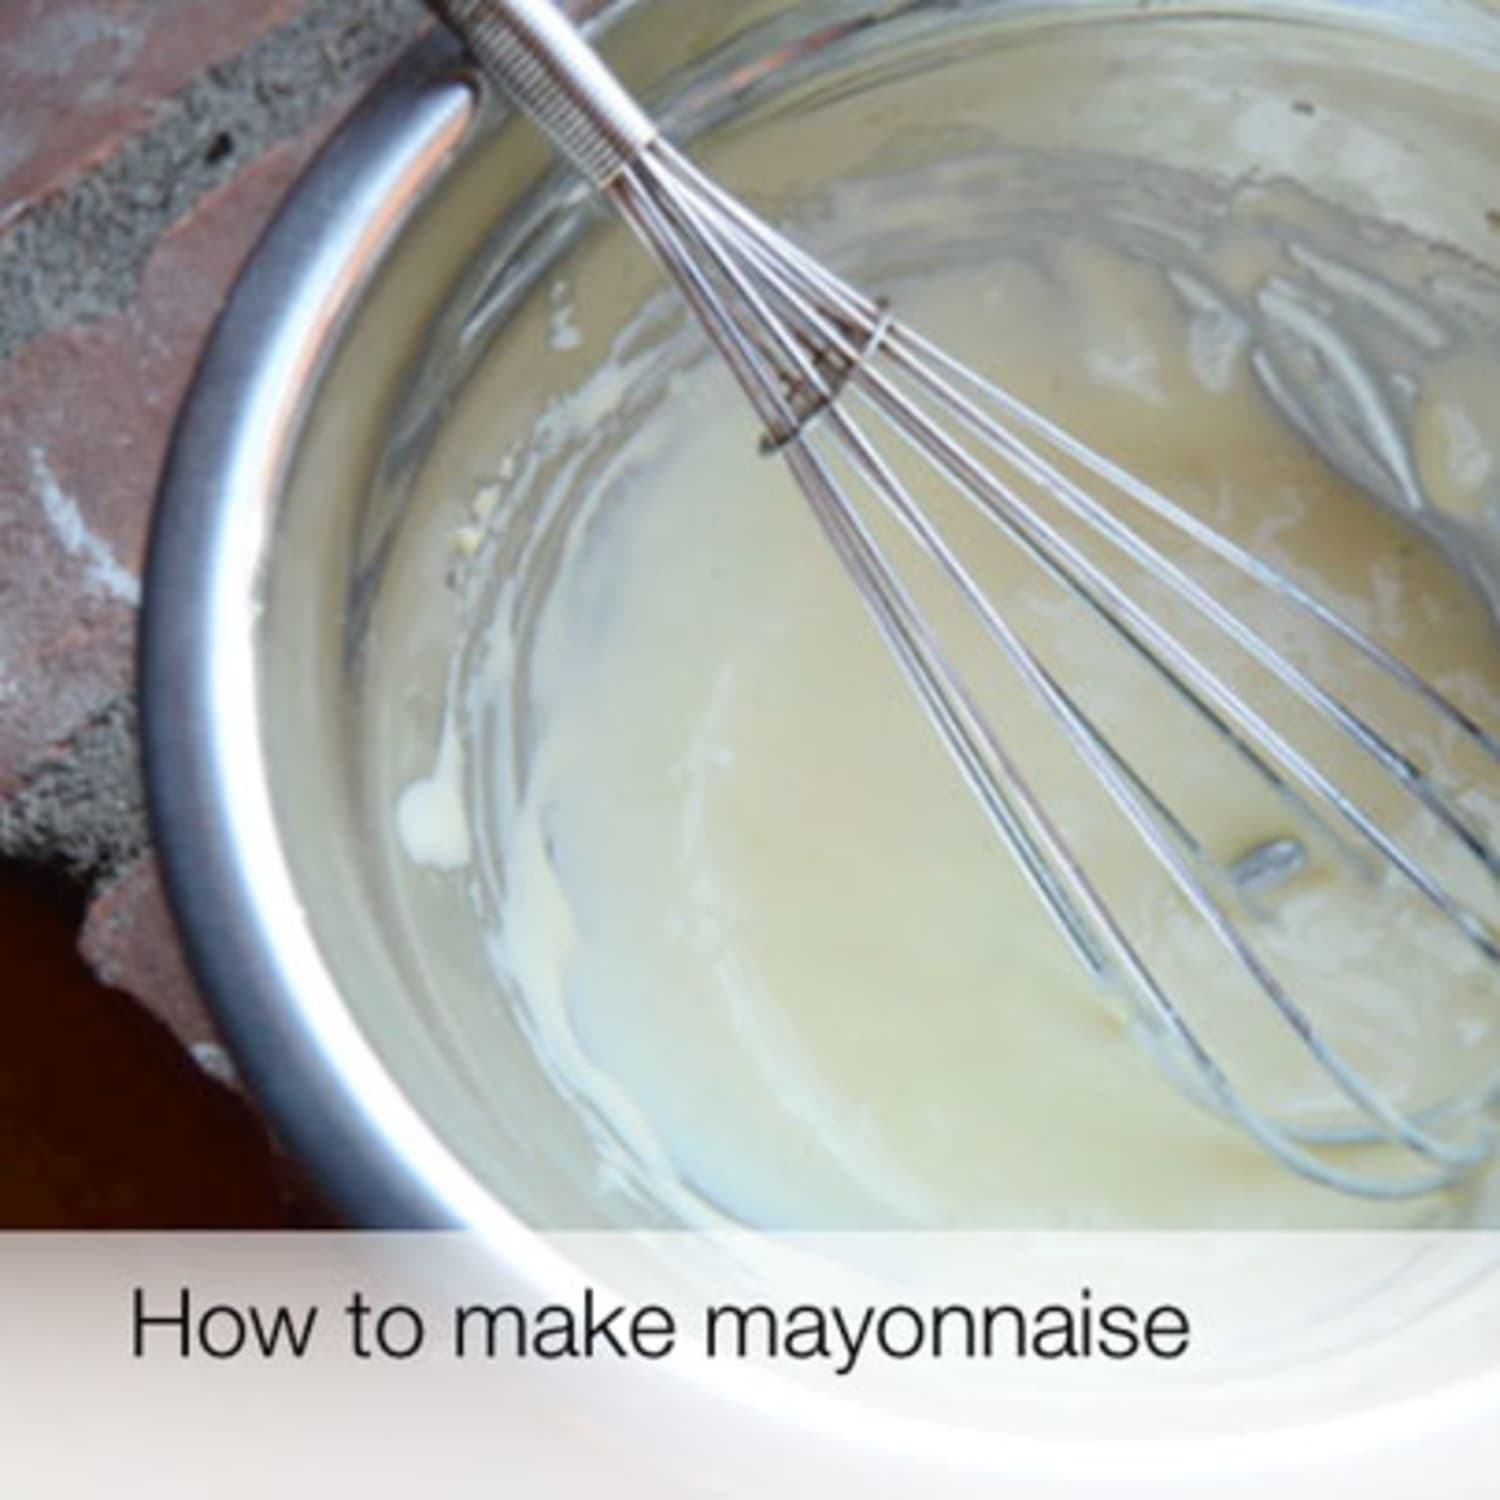 Whisking Versus Blending Mayonnaise: The Best Tools for the Job